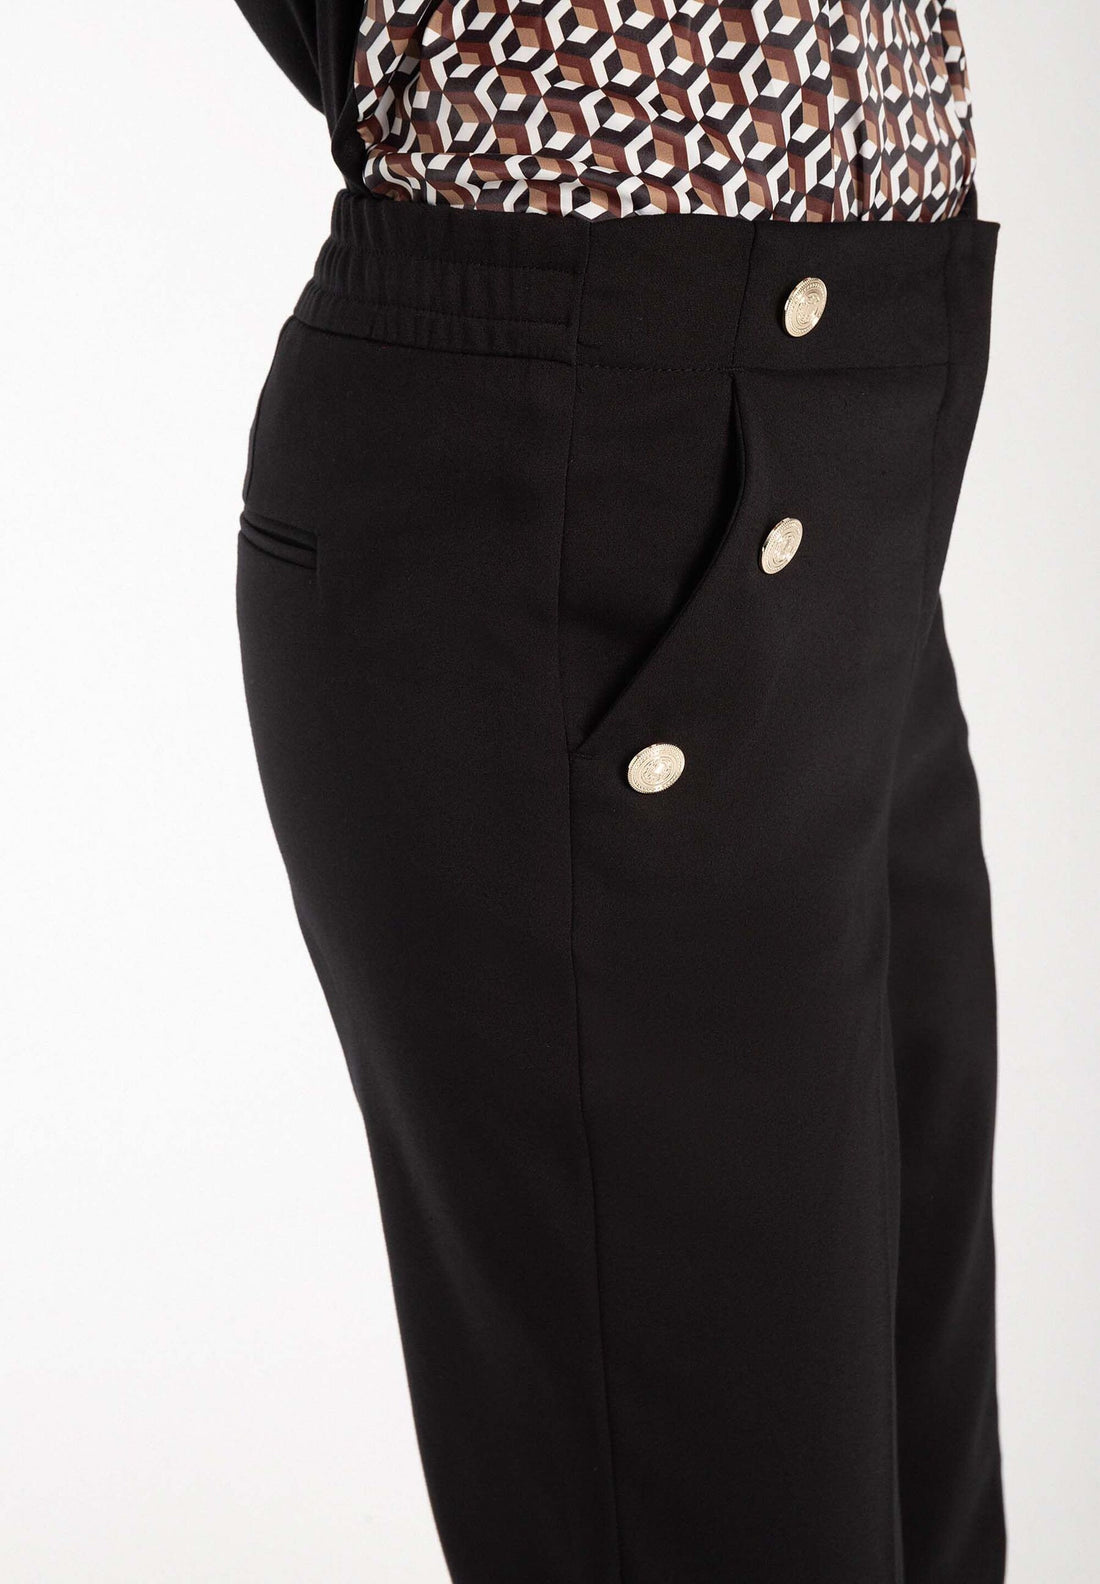 Black Slim Fit Dress Trousers With Decorative Buttons_31084055_0790_02